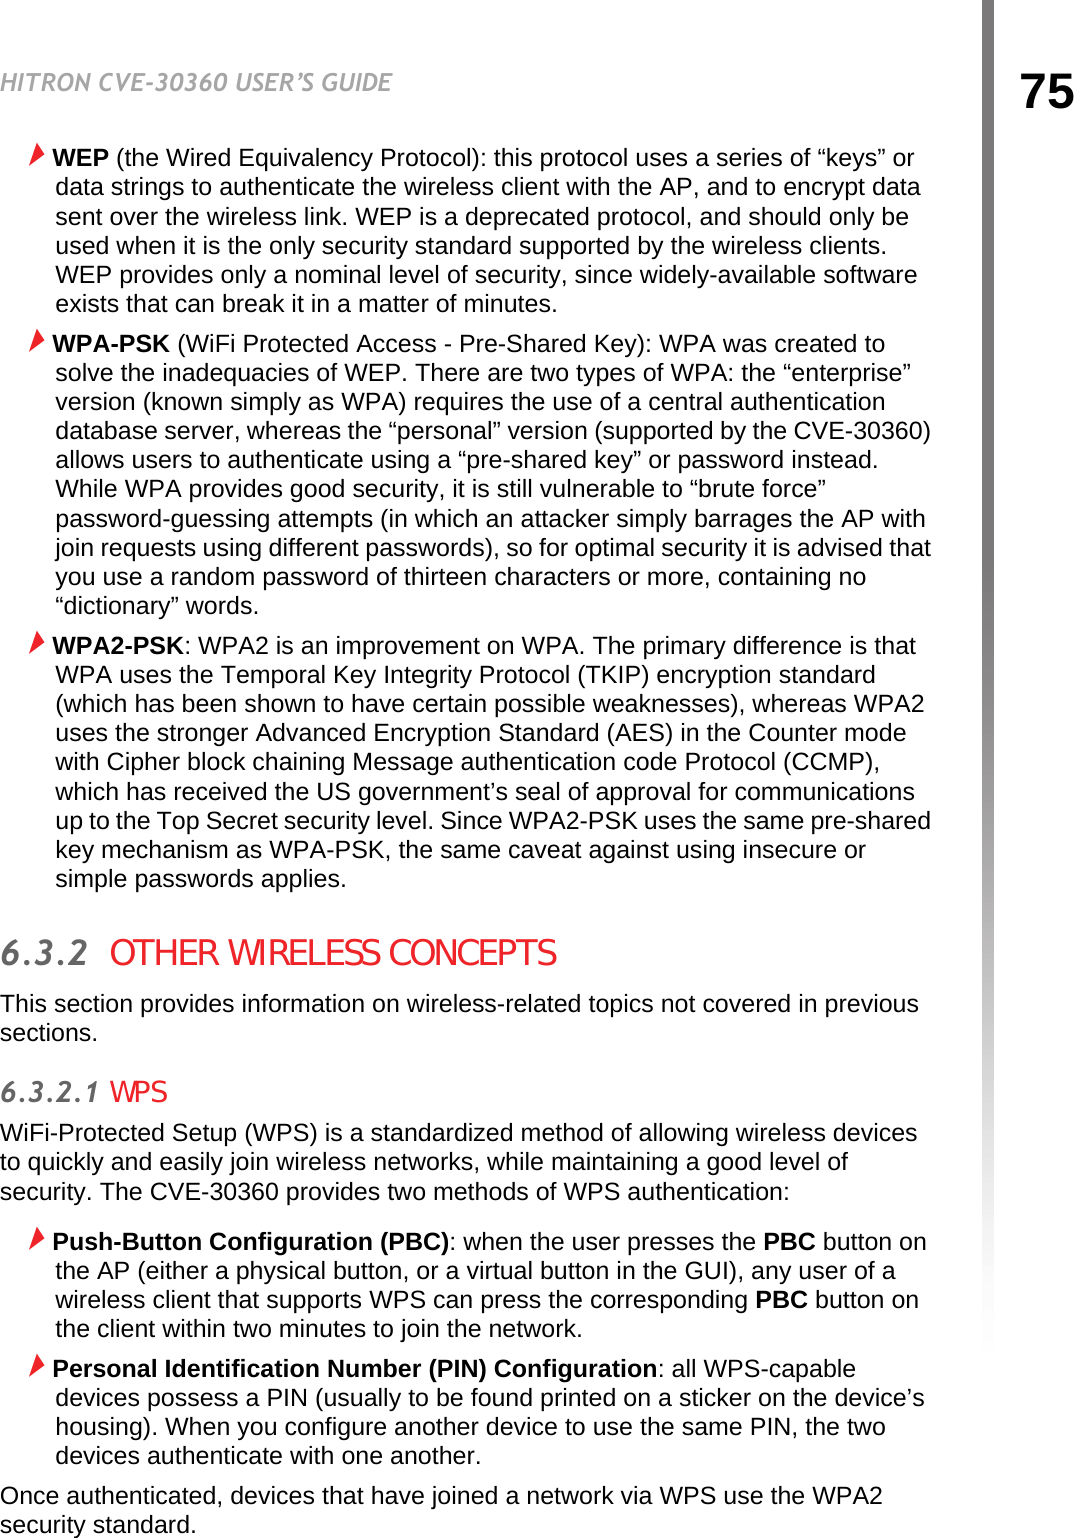 75HITRON CVE-30360 USER’S GUIDEWIRELESSWEP (the Wired Equivalency Protocol): this protocol uses a series of “keys” or data strings to authenticate the wireless client with the AP, and to encrypt data sent over the wireless link. WEP is a deprecated protocol, and should only be used when it is the only security standard supported by the wireless clients. WEP provides only a nominal level of security, since widely-available software exists that can break it in a matter of minutes.WPA-PSK (WiFi Protected Access - Pre-Shared Key): WPA was created to solve the inadequacies of WEP. There are two types of WPA: the “enterprise” version (known simply as WPA) requires the use of a central authentication database server, whereas the “personal” version (supported by the CVE-30360) allows users to authenticate using a “pre-shared key” or password instead. While WPA provides good security, it is still vulnerable to “brute force” password-guessing attempts (in which an attacker simply barrages the AP with join requests using different passwords), so for optimal security it is advised that you use a random password of thirteen characters or more, containing no “dictionary” words.WPA2-PSK: WPA2 is an improvement on WPA. The primary difference is that WPA uses the Temporal Key Integrity Protocol (TKIP) encryption standard (which has been shown to have certain possible weaknesses), whereas WPA2 uses the stronger Advanced Encryption Standard (AES) in the Counter mode with Cipher block chaining Message authentication code Protocol (CCMP), which has received the US government’s seal of approval for communications up to the Top Secret security level. Since WPA2-PSK uses the same pre-shared key mechanism as WPA-PSK, the same caveat against using insecure or simple passwords applies.6.3.2  OTHER WIRELESS CONCEPTSThis section provides information on wireless-related topics not covered in previous sections.6.3.2.1 WPSWiFi-Protected Setup (WPS) is a standardized method of allowing wireless devices to quickly and easily join wireless networks, while maintaining a good level of security. The CVE-30360 provides two methods of WPS authentication:Push-Button Configuration (PBC): when the user presses the PBC button on the AP (either a physical button, or a virtual button in the GUI), any user of a wireless client that supports WPS can press the corresponding PBC button on the client within two minutes to join the network.Personal Identification Number (PIN) Configuration: all WPS-capable devices possess a PIN (usually to be found printed on a sticker on the device’s housing). When you configure another device to use the same PIN, the two devices authenticate with one another.Once authenticated, devices that have joined a network via WPS use the WPA2 security standard.